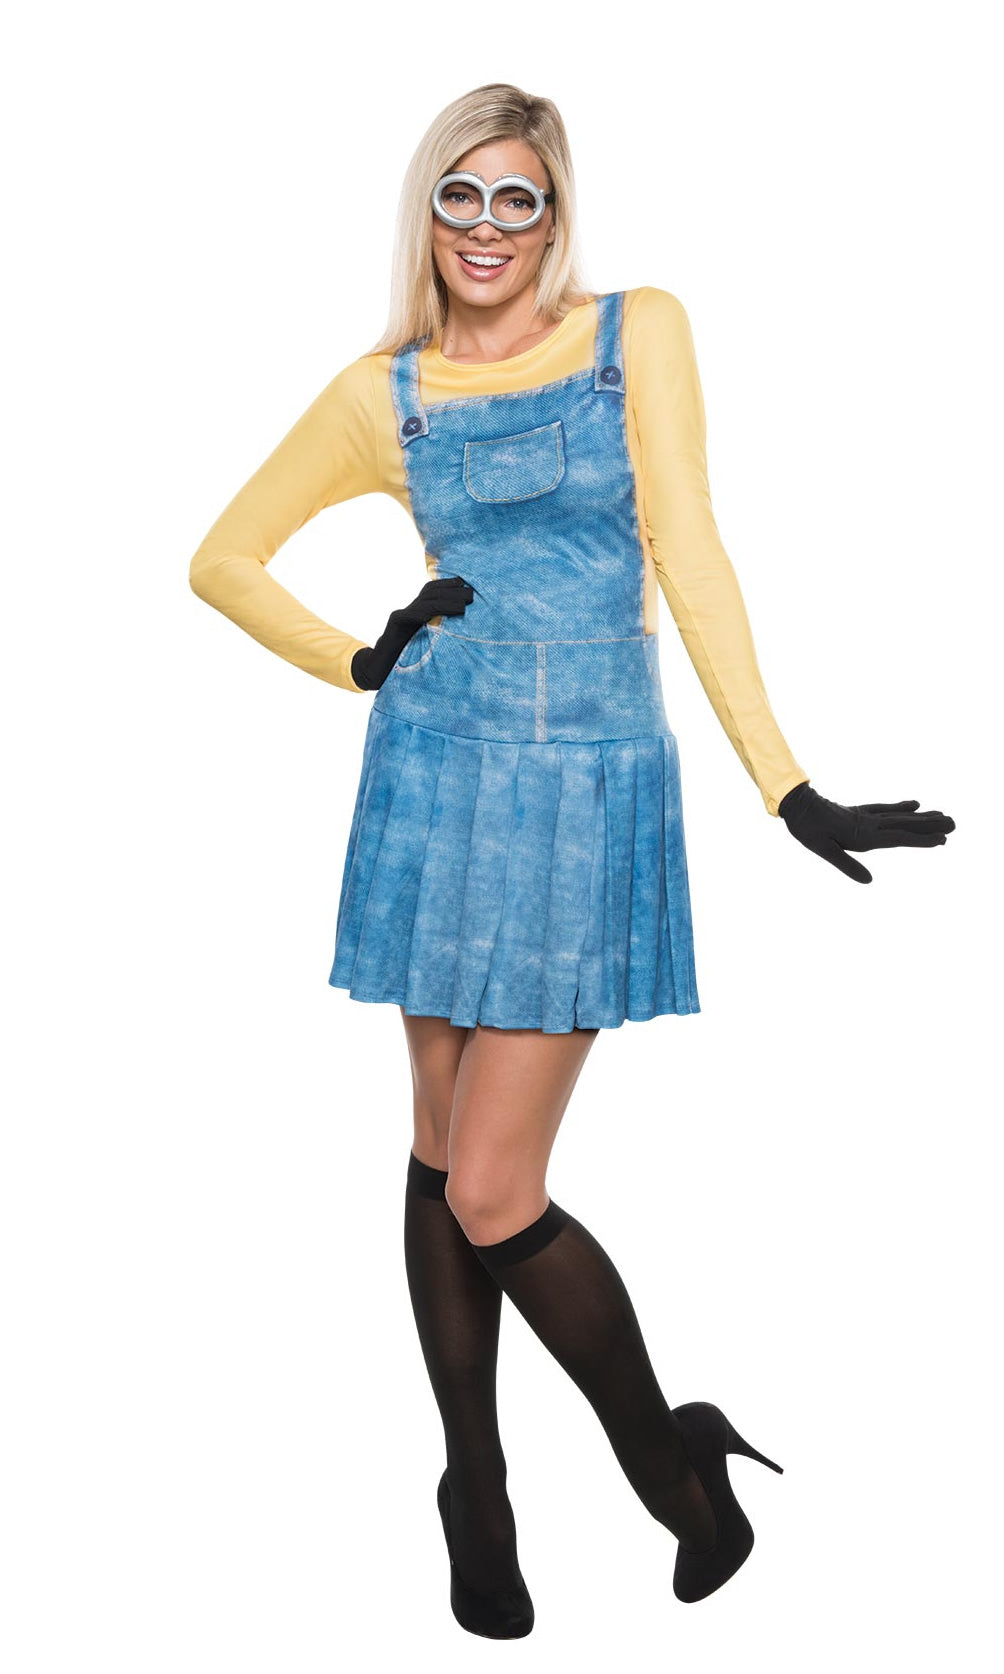 Short blue and yellow Minion dress with goggles, gloves and headband